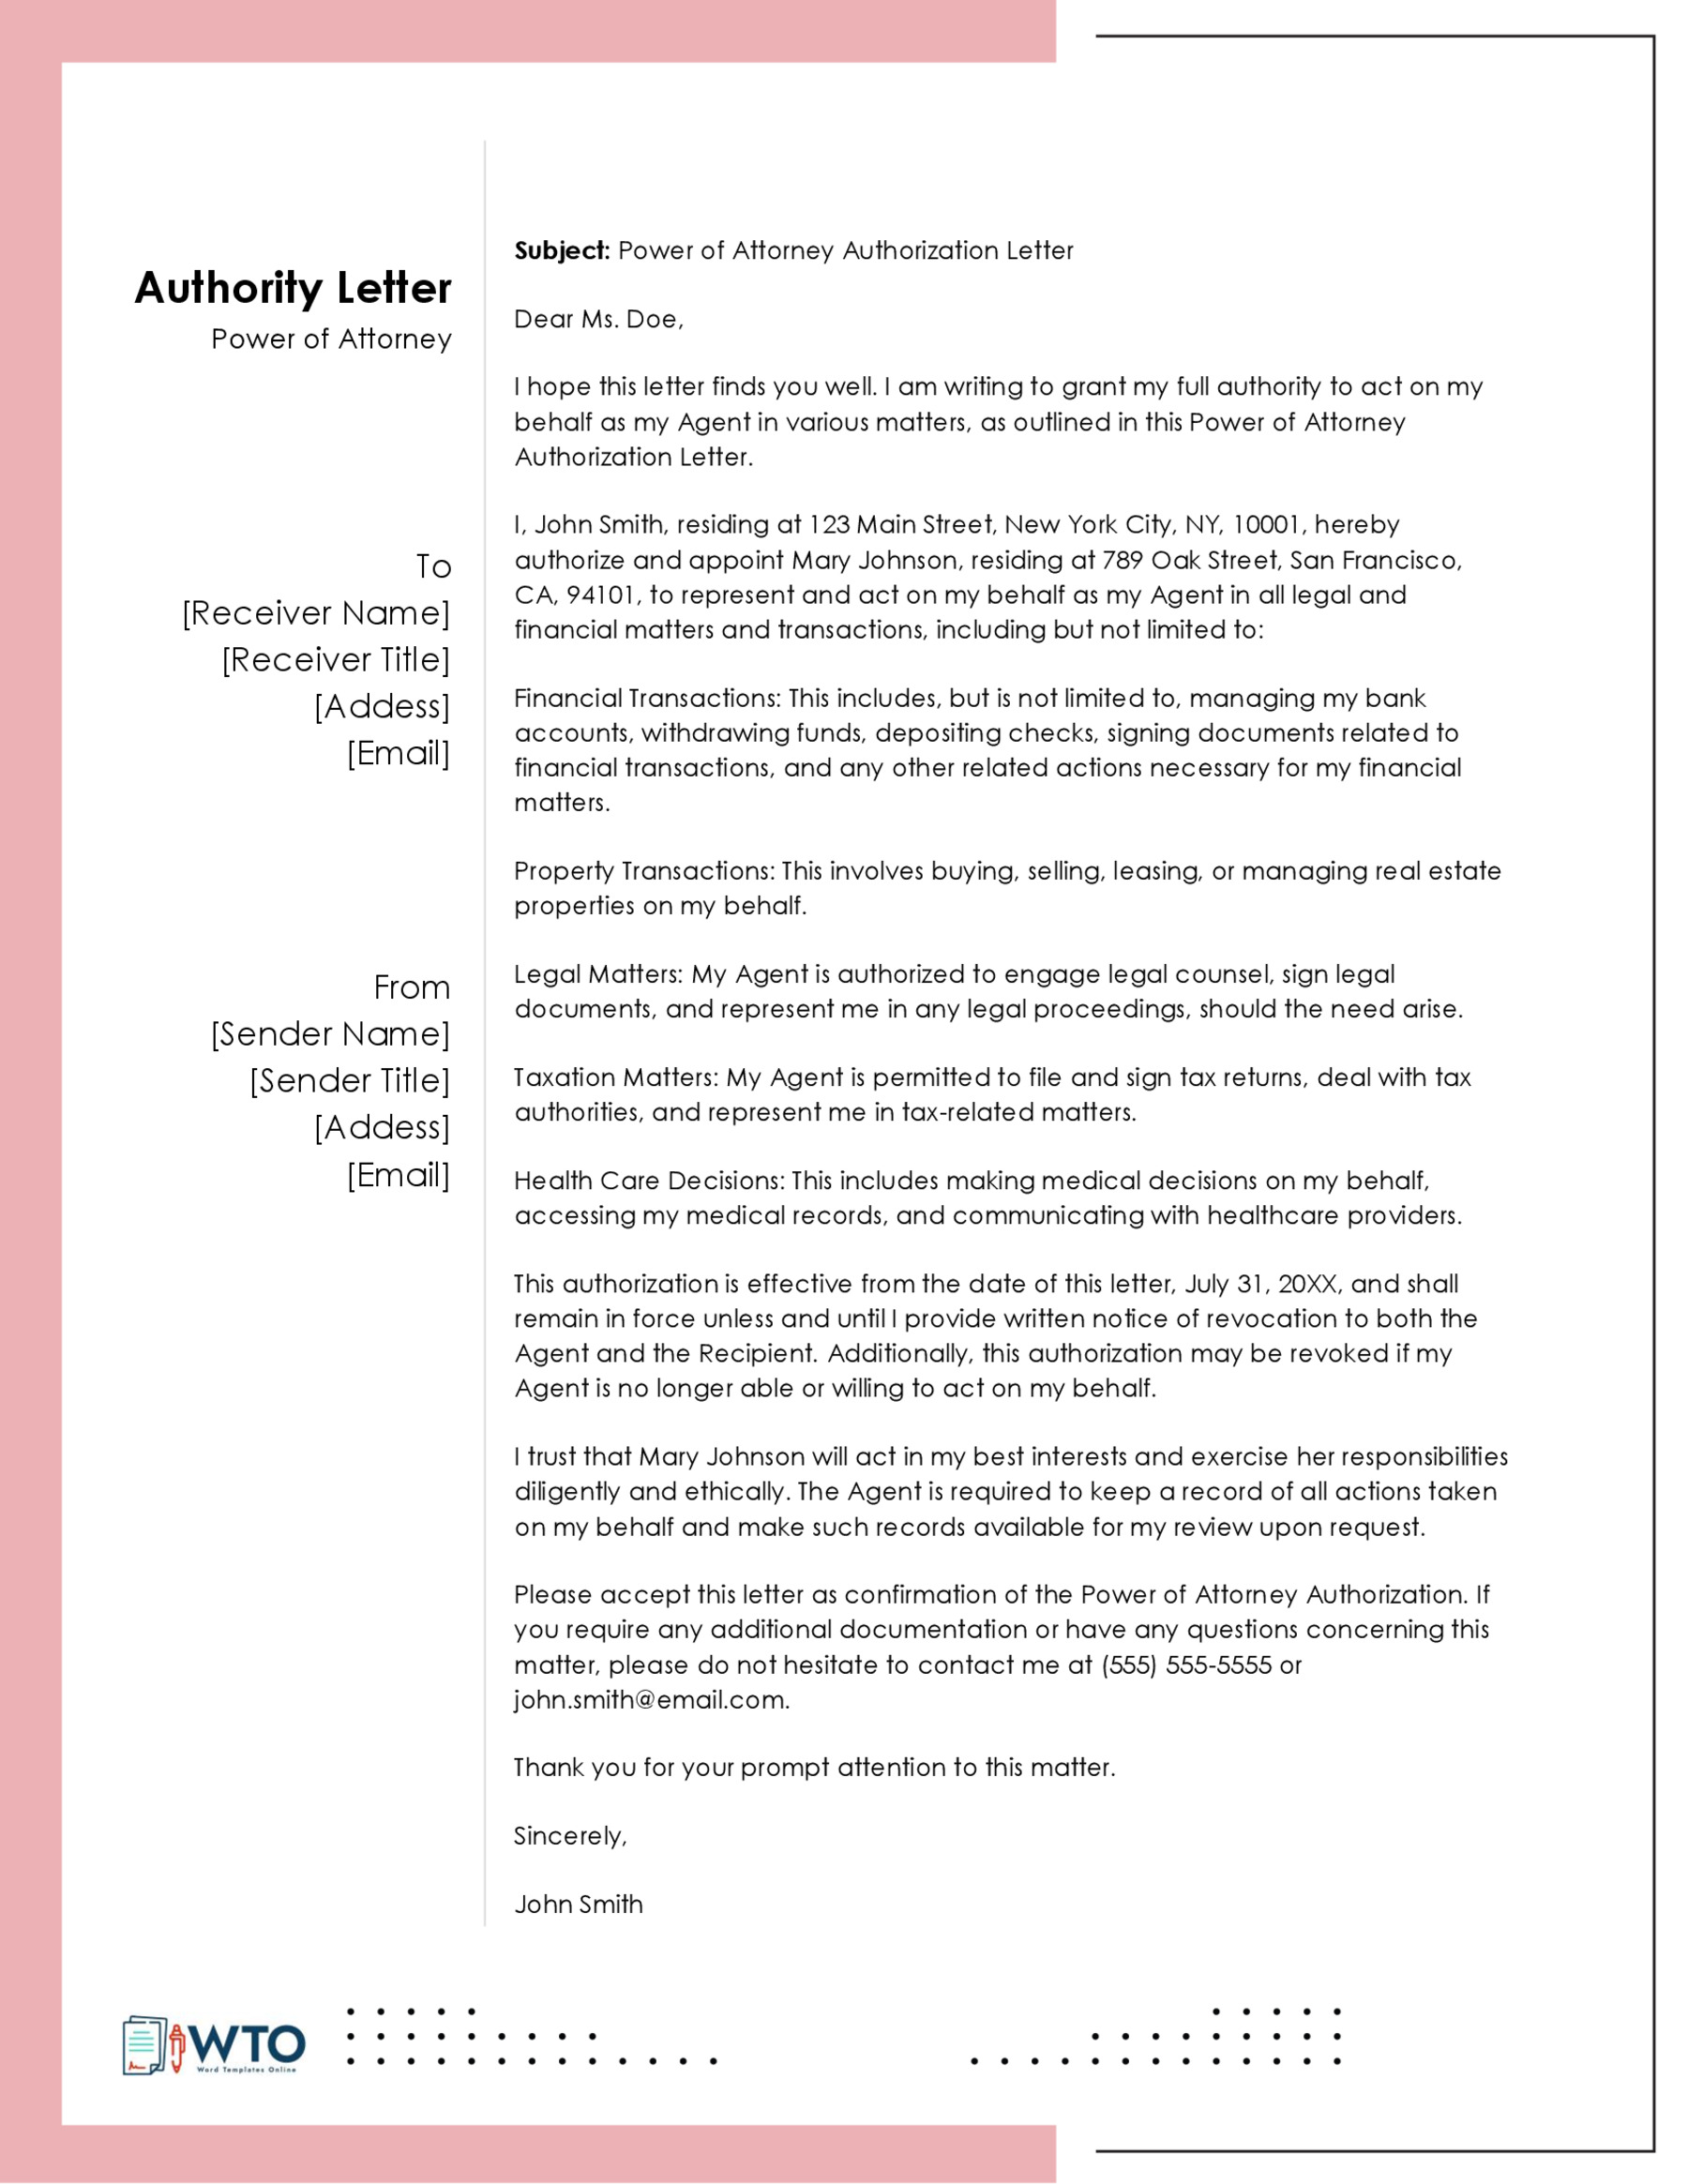 Free Power of Attorney Authorization Letter Sample 03 for Word